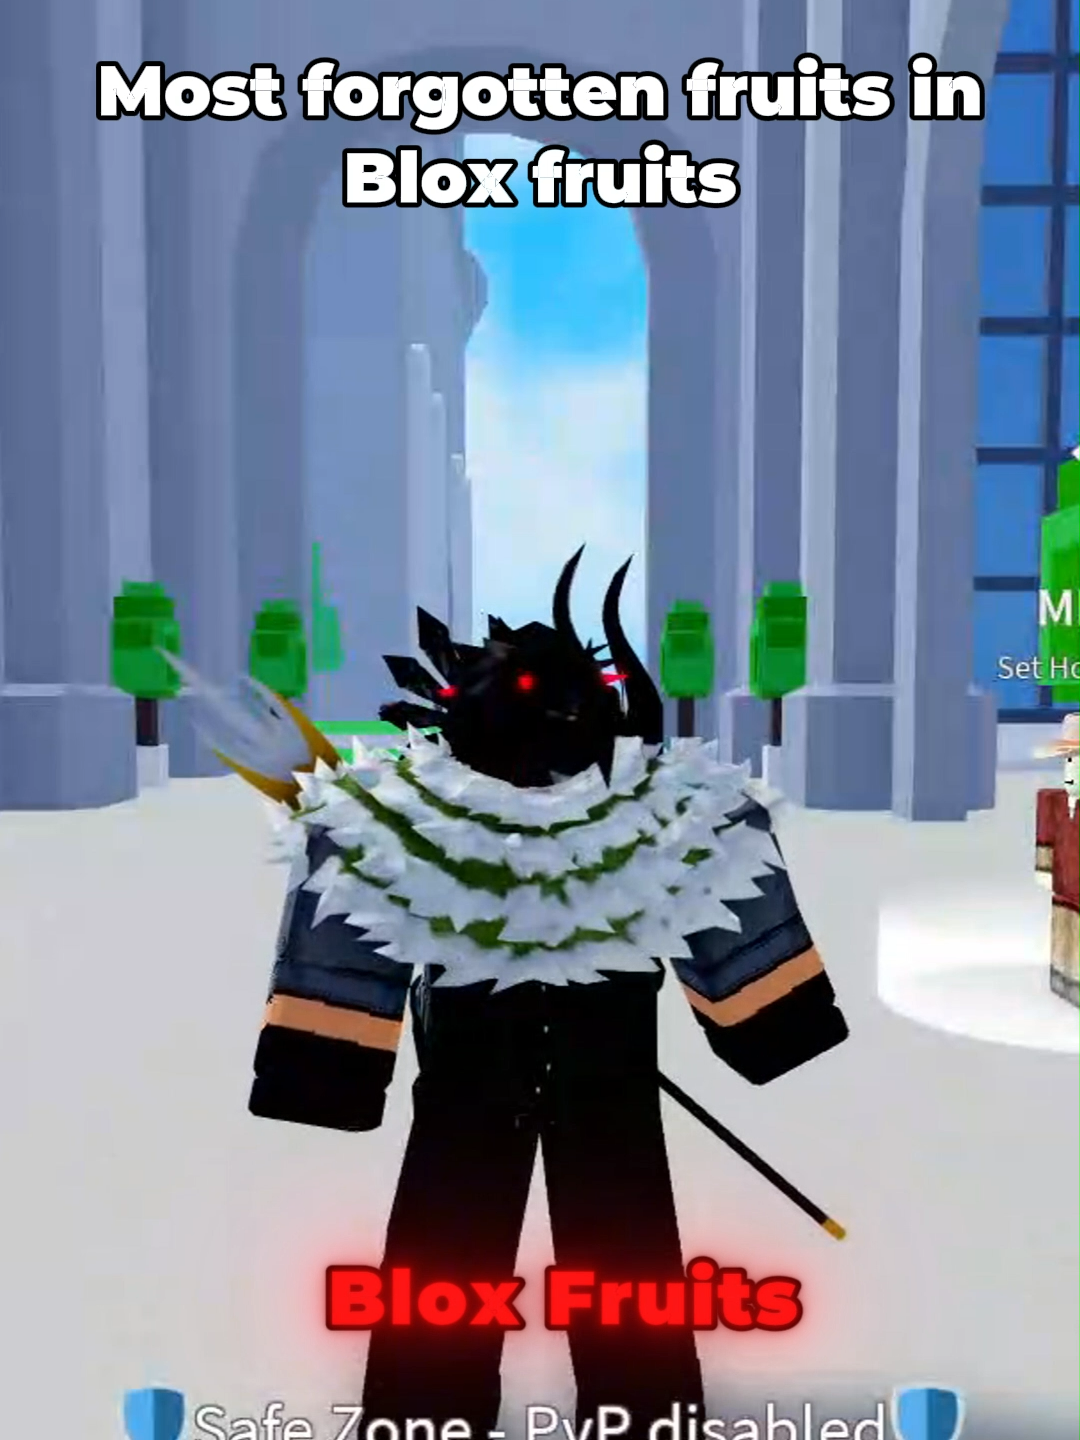 THE Most forgotten fruits in Blox fruits?! #roblox #bloxfruits #viral #fyp #dingdongdpirates